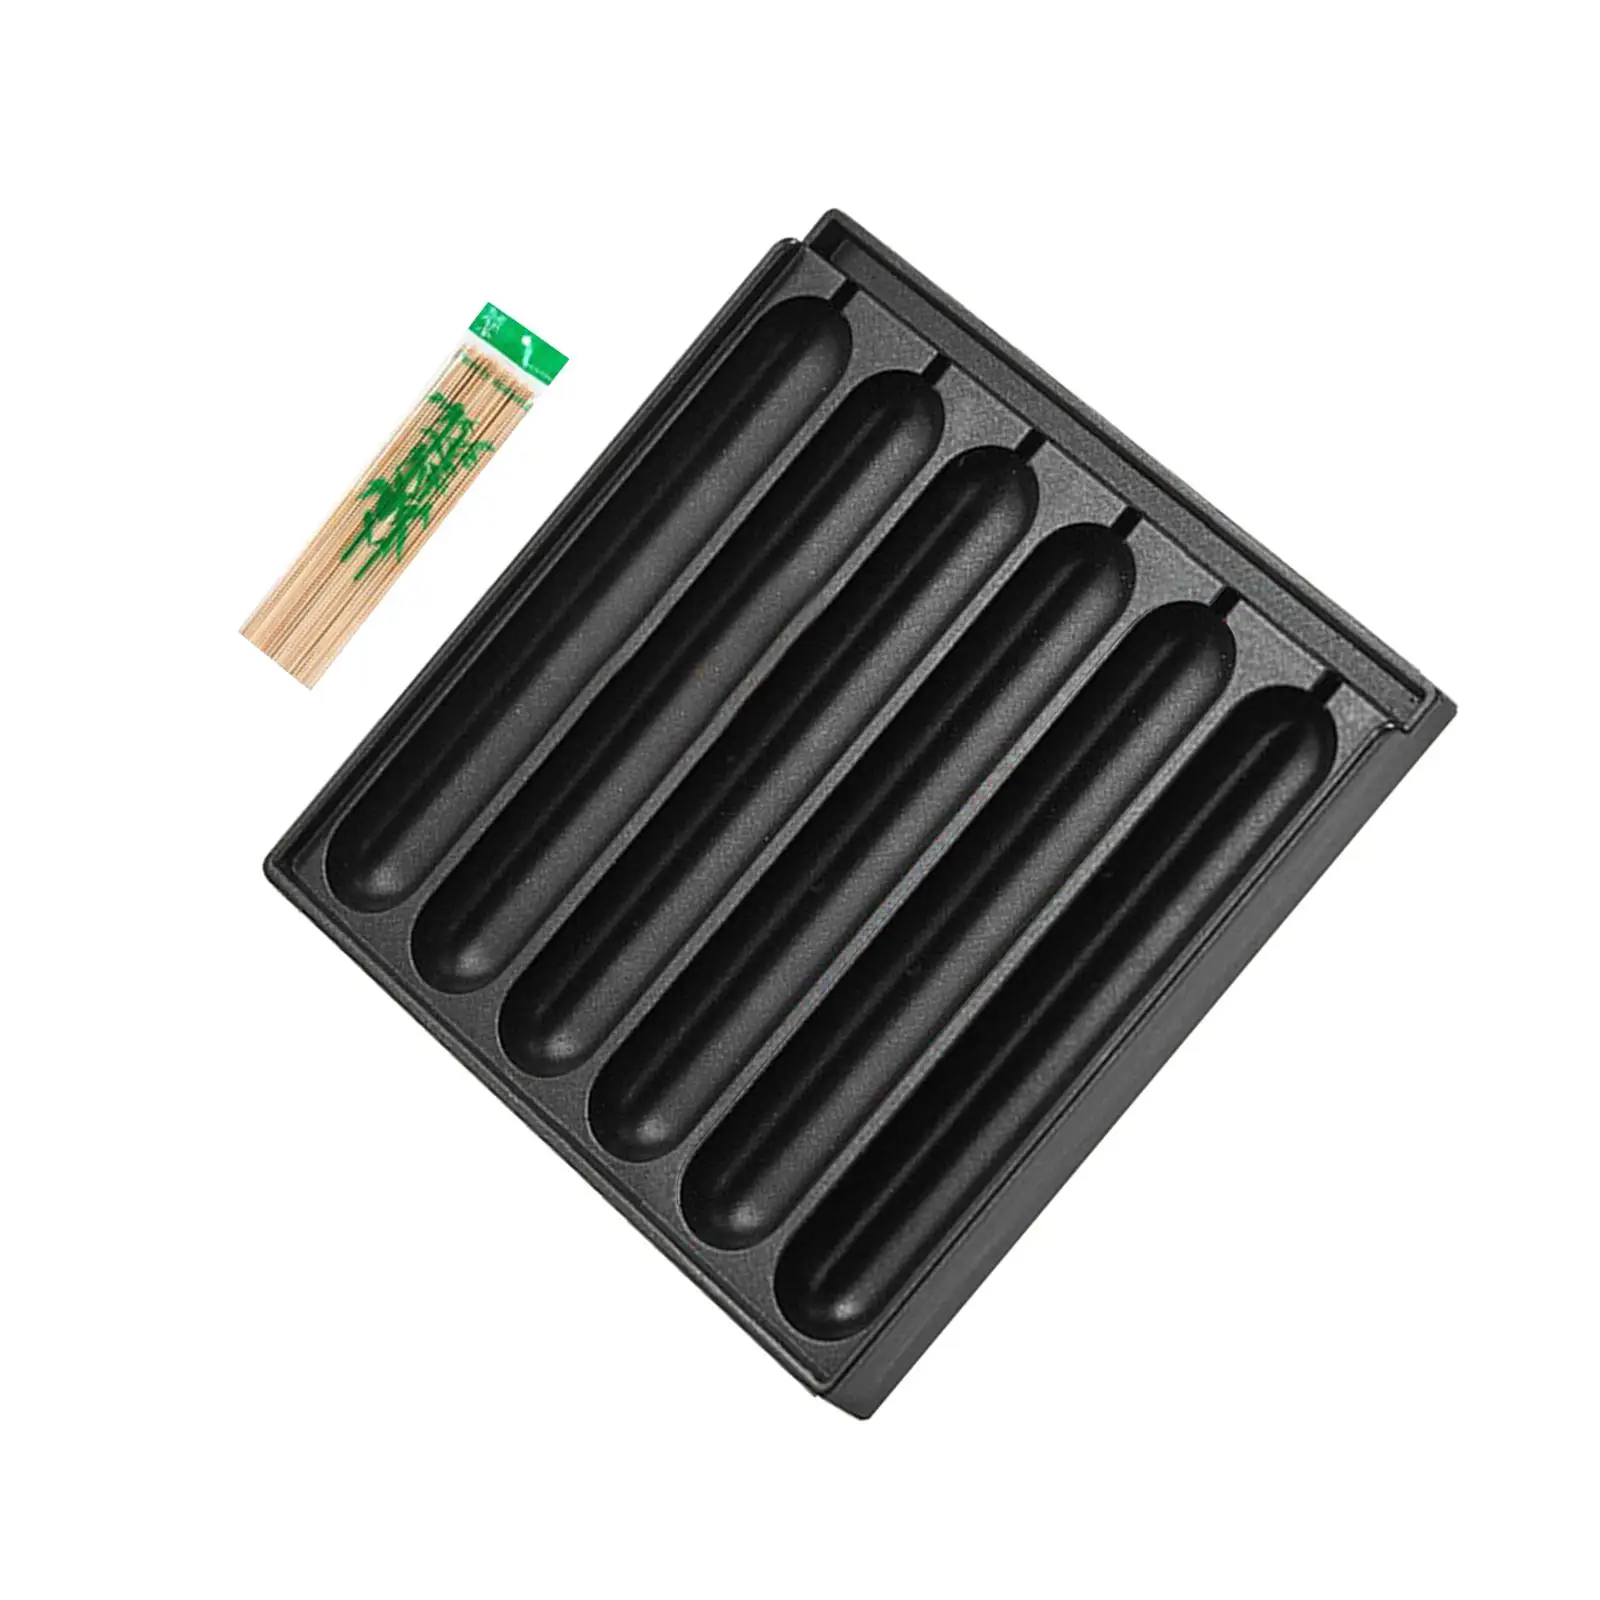 6 Cavity Sausage Grilling Pan Nonstick 6 Grids for Breakfast Outdoor Cooking